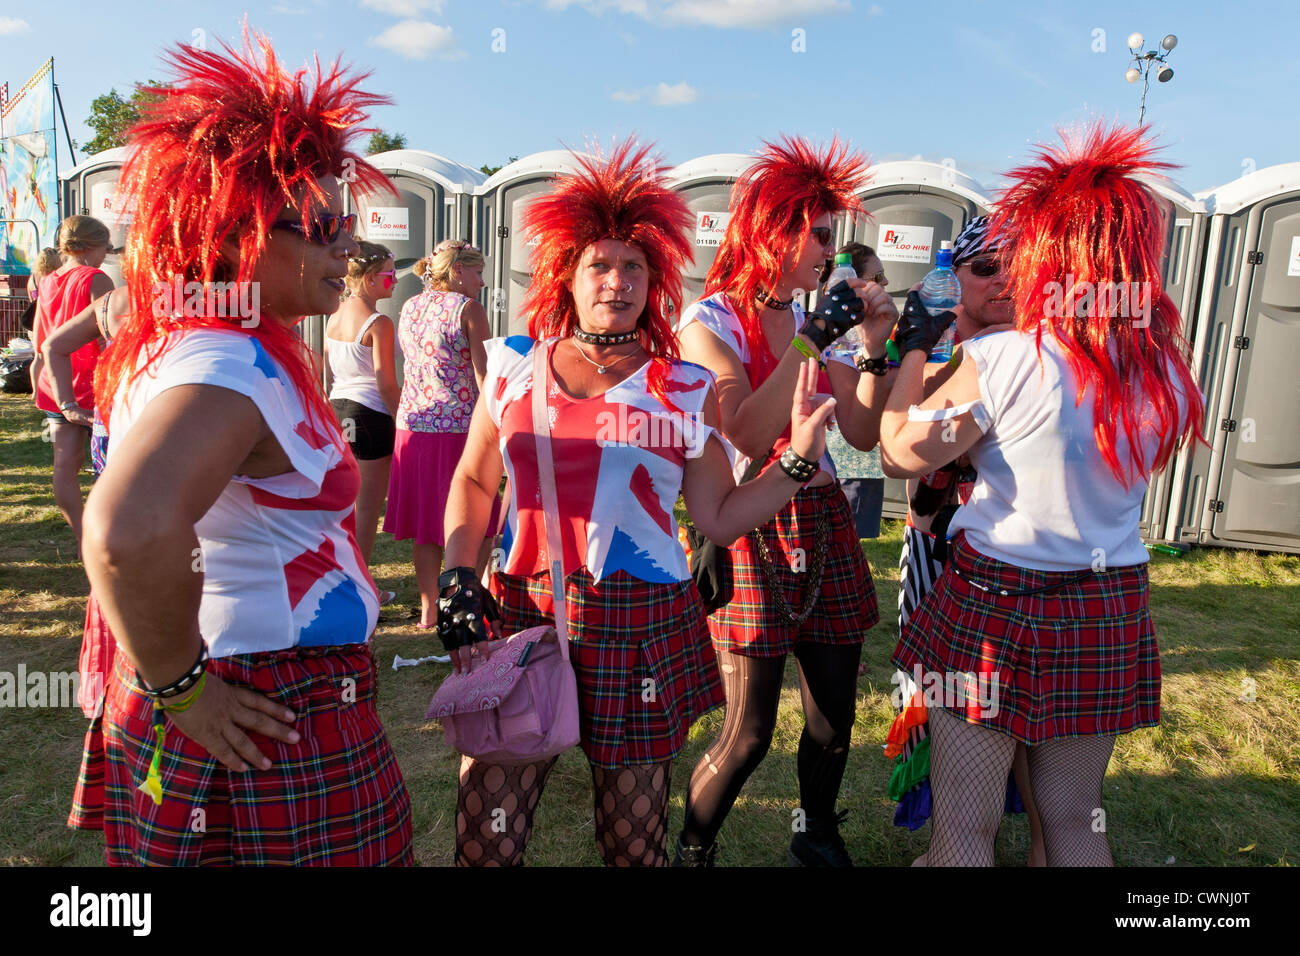 Festival goers with red wigs at the Rewind Festival Henley on Thames 2012. JMH6031 Stock Photo